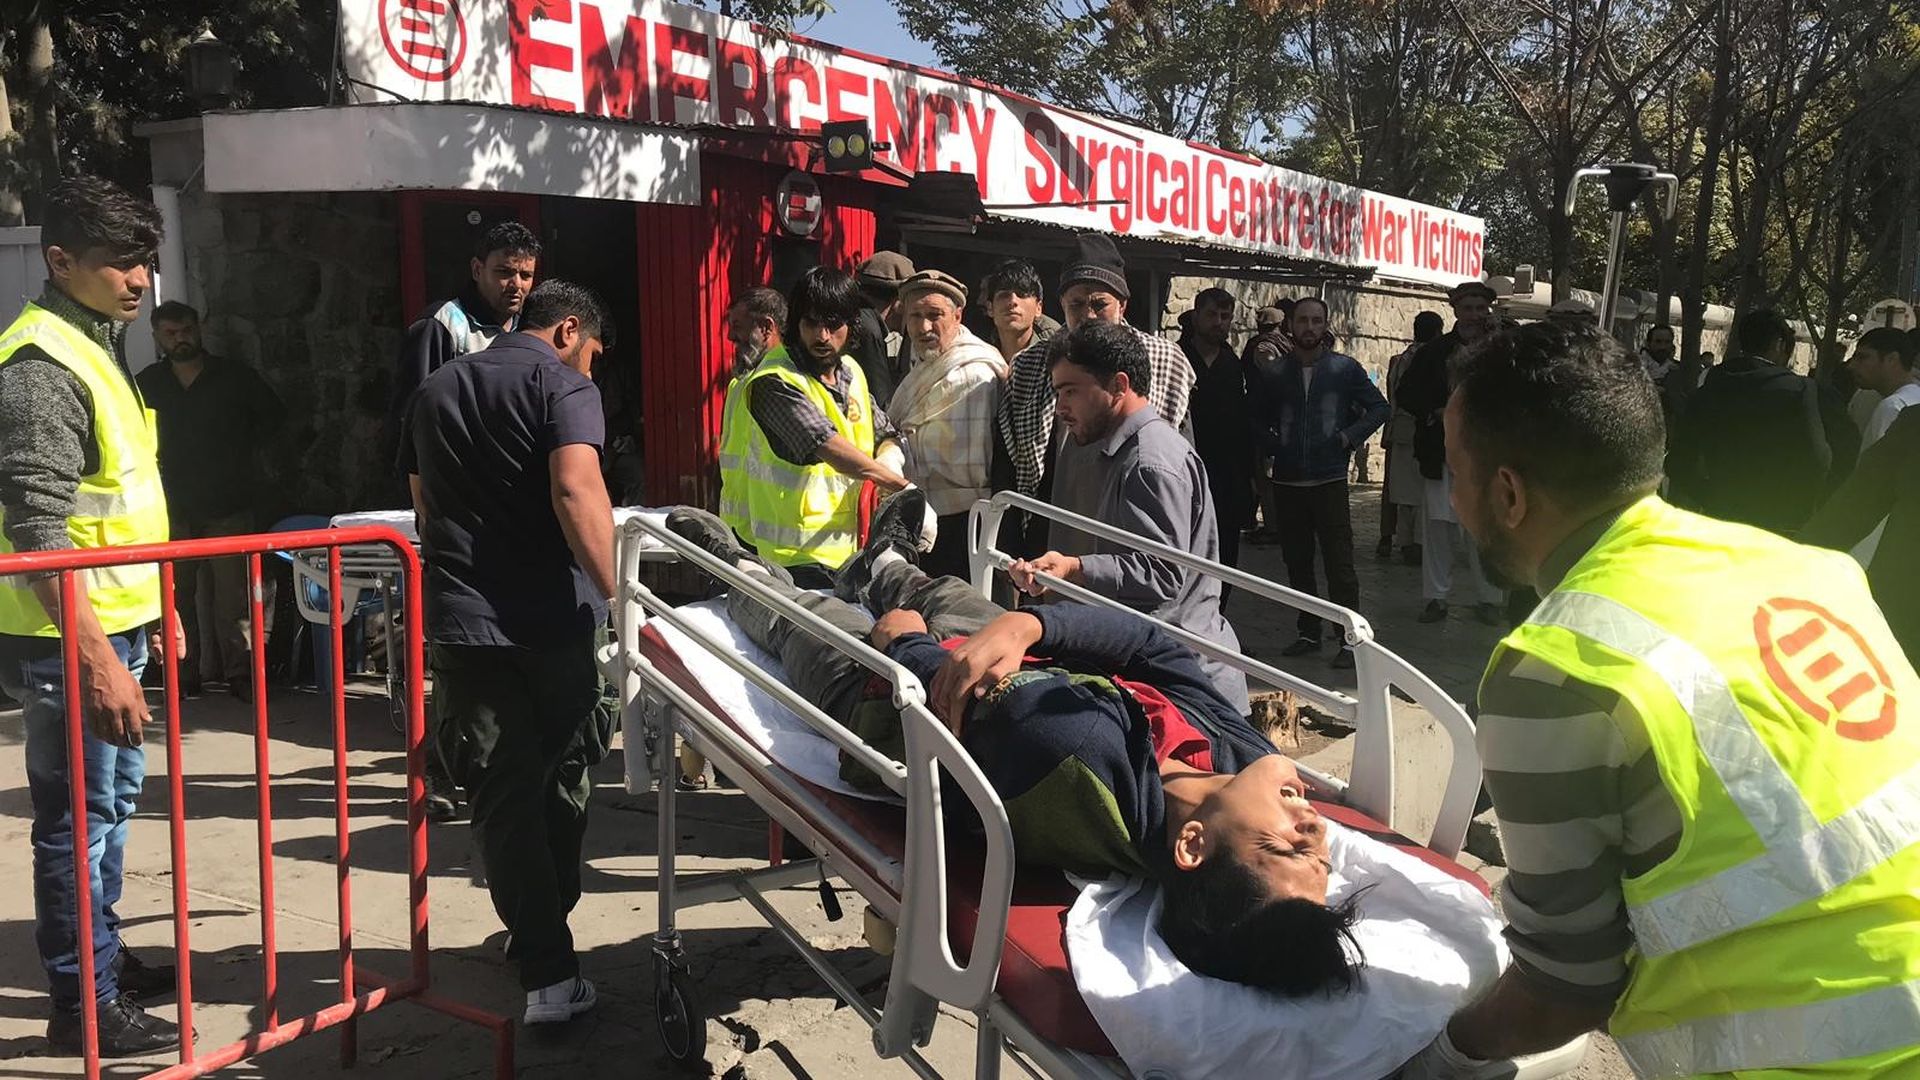 A wounded person being carried on a stretcher.